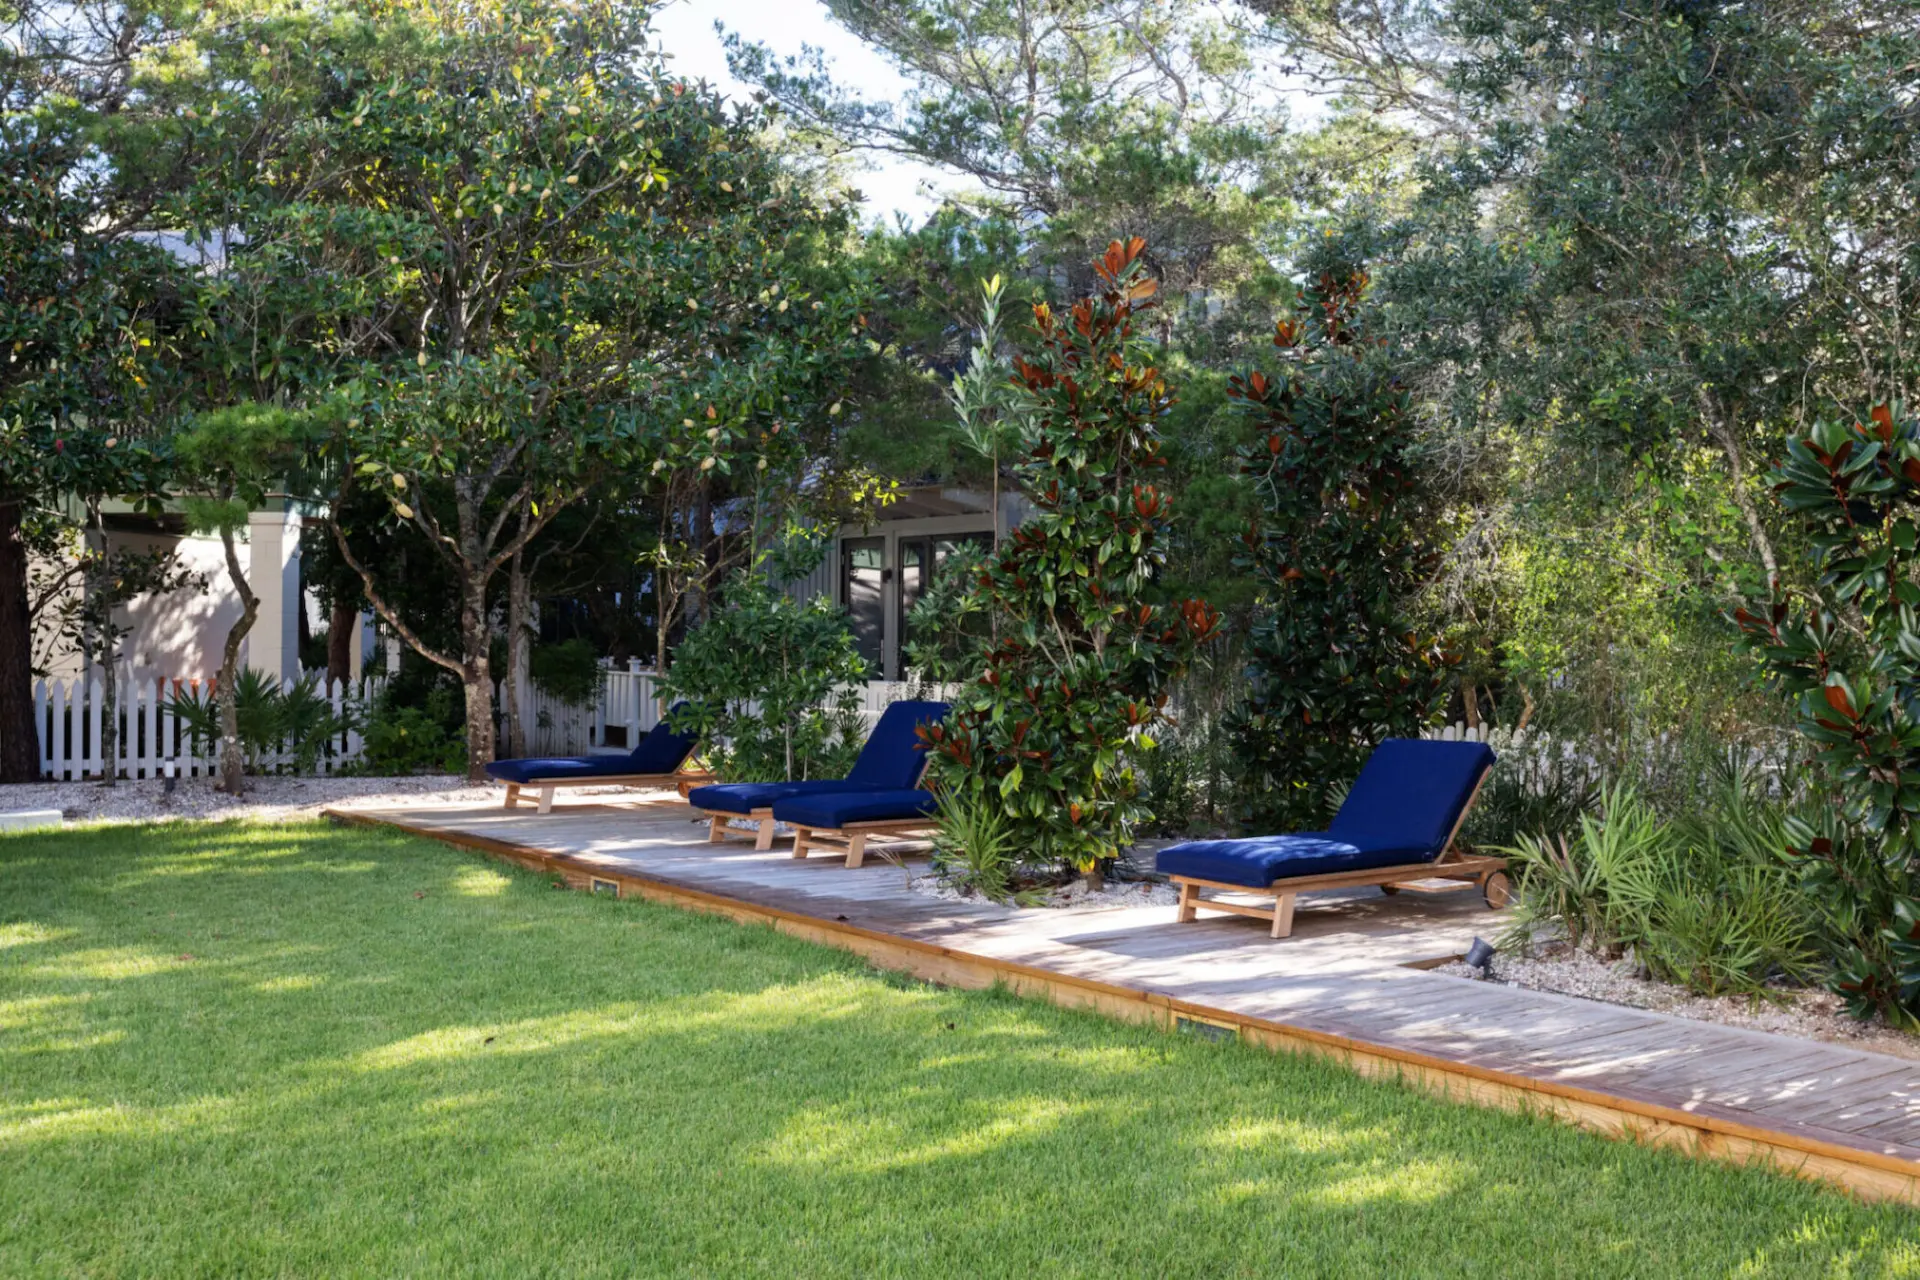 Picture of the lounge chairs in blue color in the garden